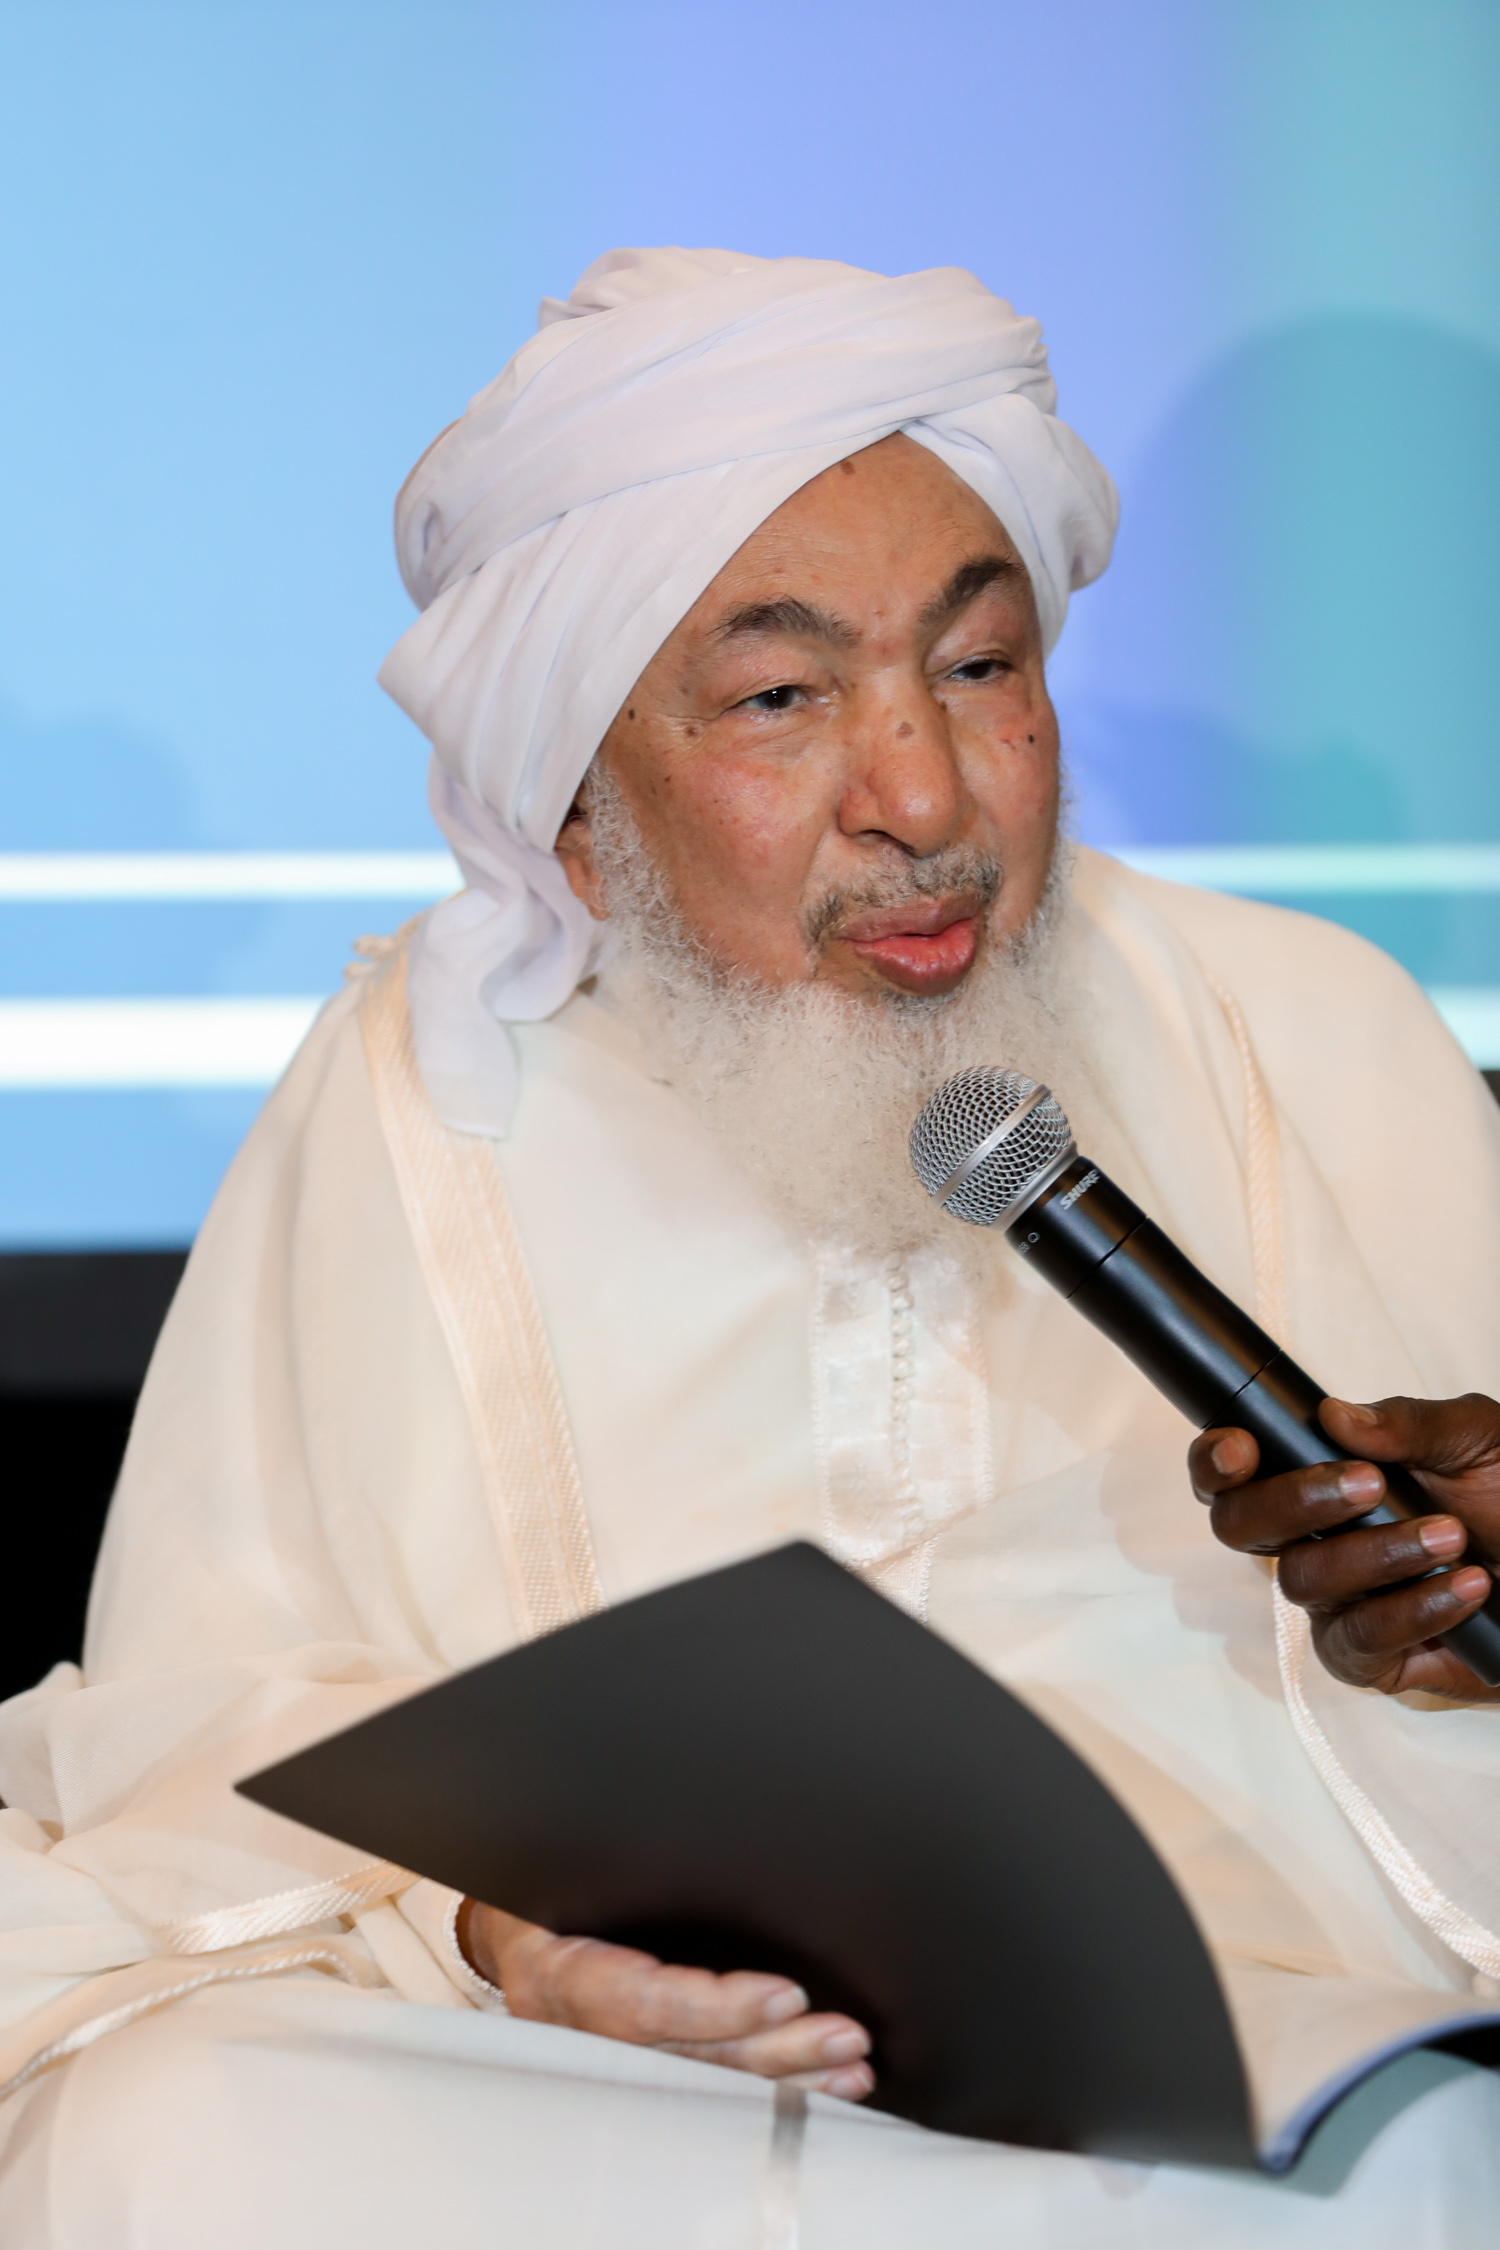 Shaykh Abdallah Bin Bayyah, President of the Abu Dhabi Forum for Peace, speaking after receiving the Human Dignity Award from American Jewish Committee.